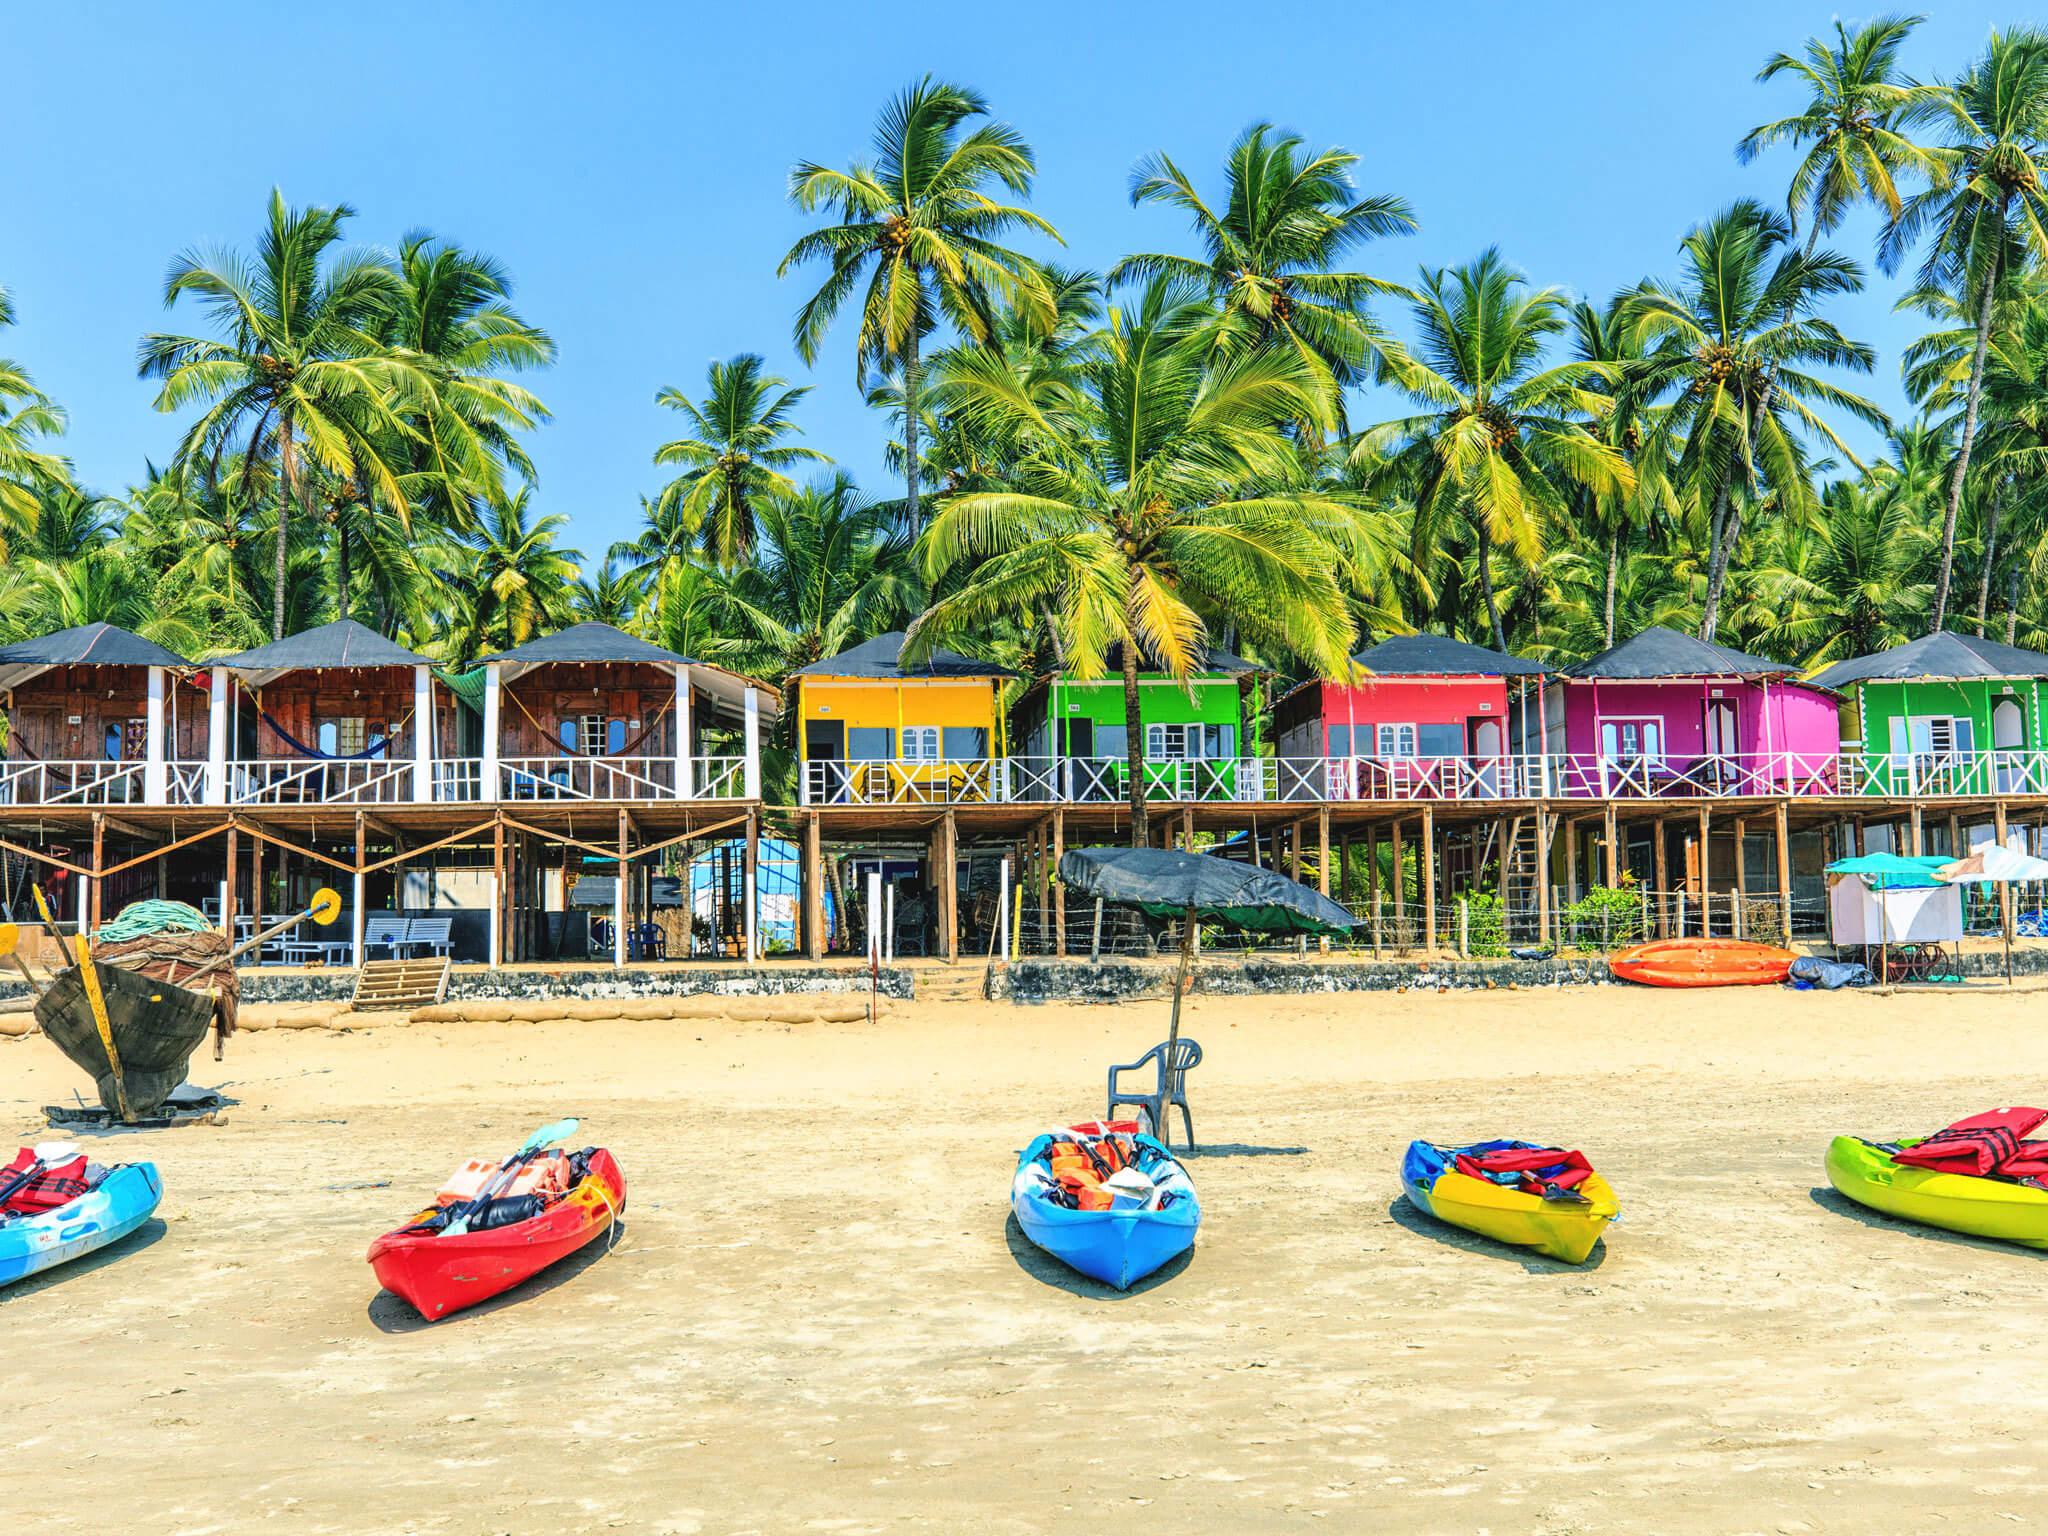 Goa is one of the smallest states in India